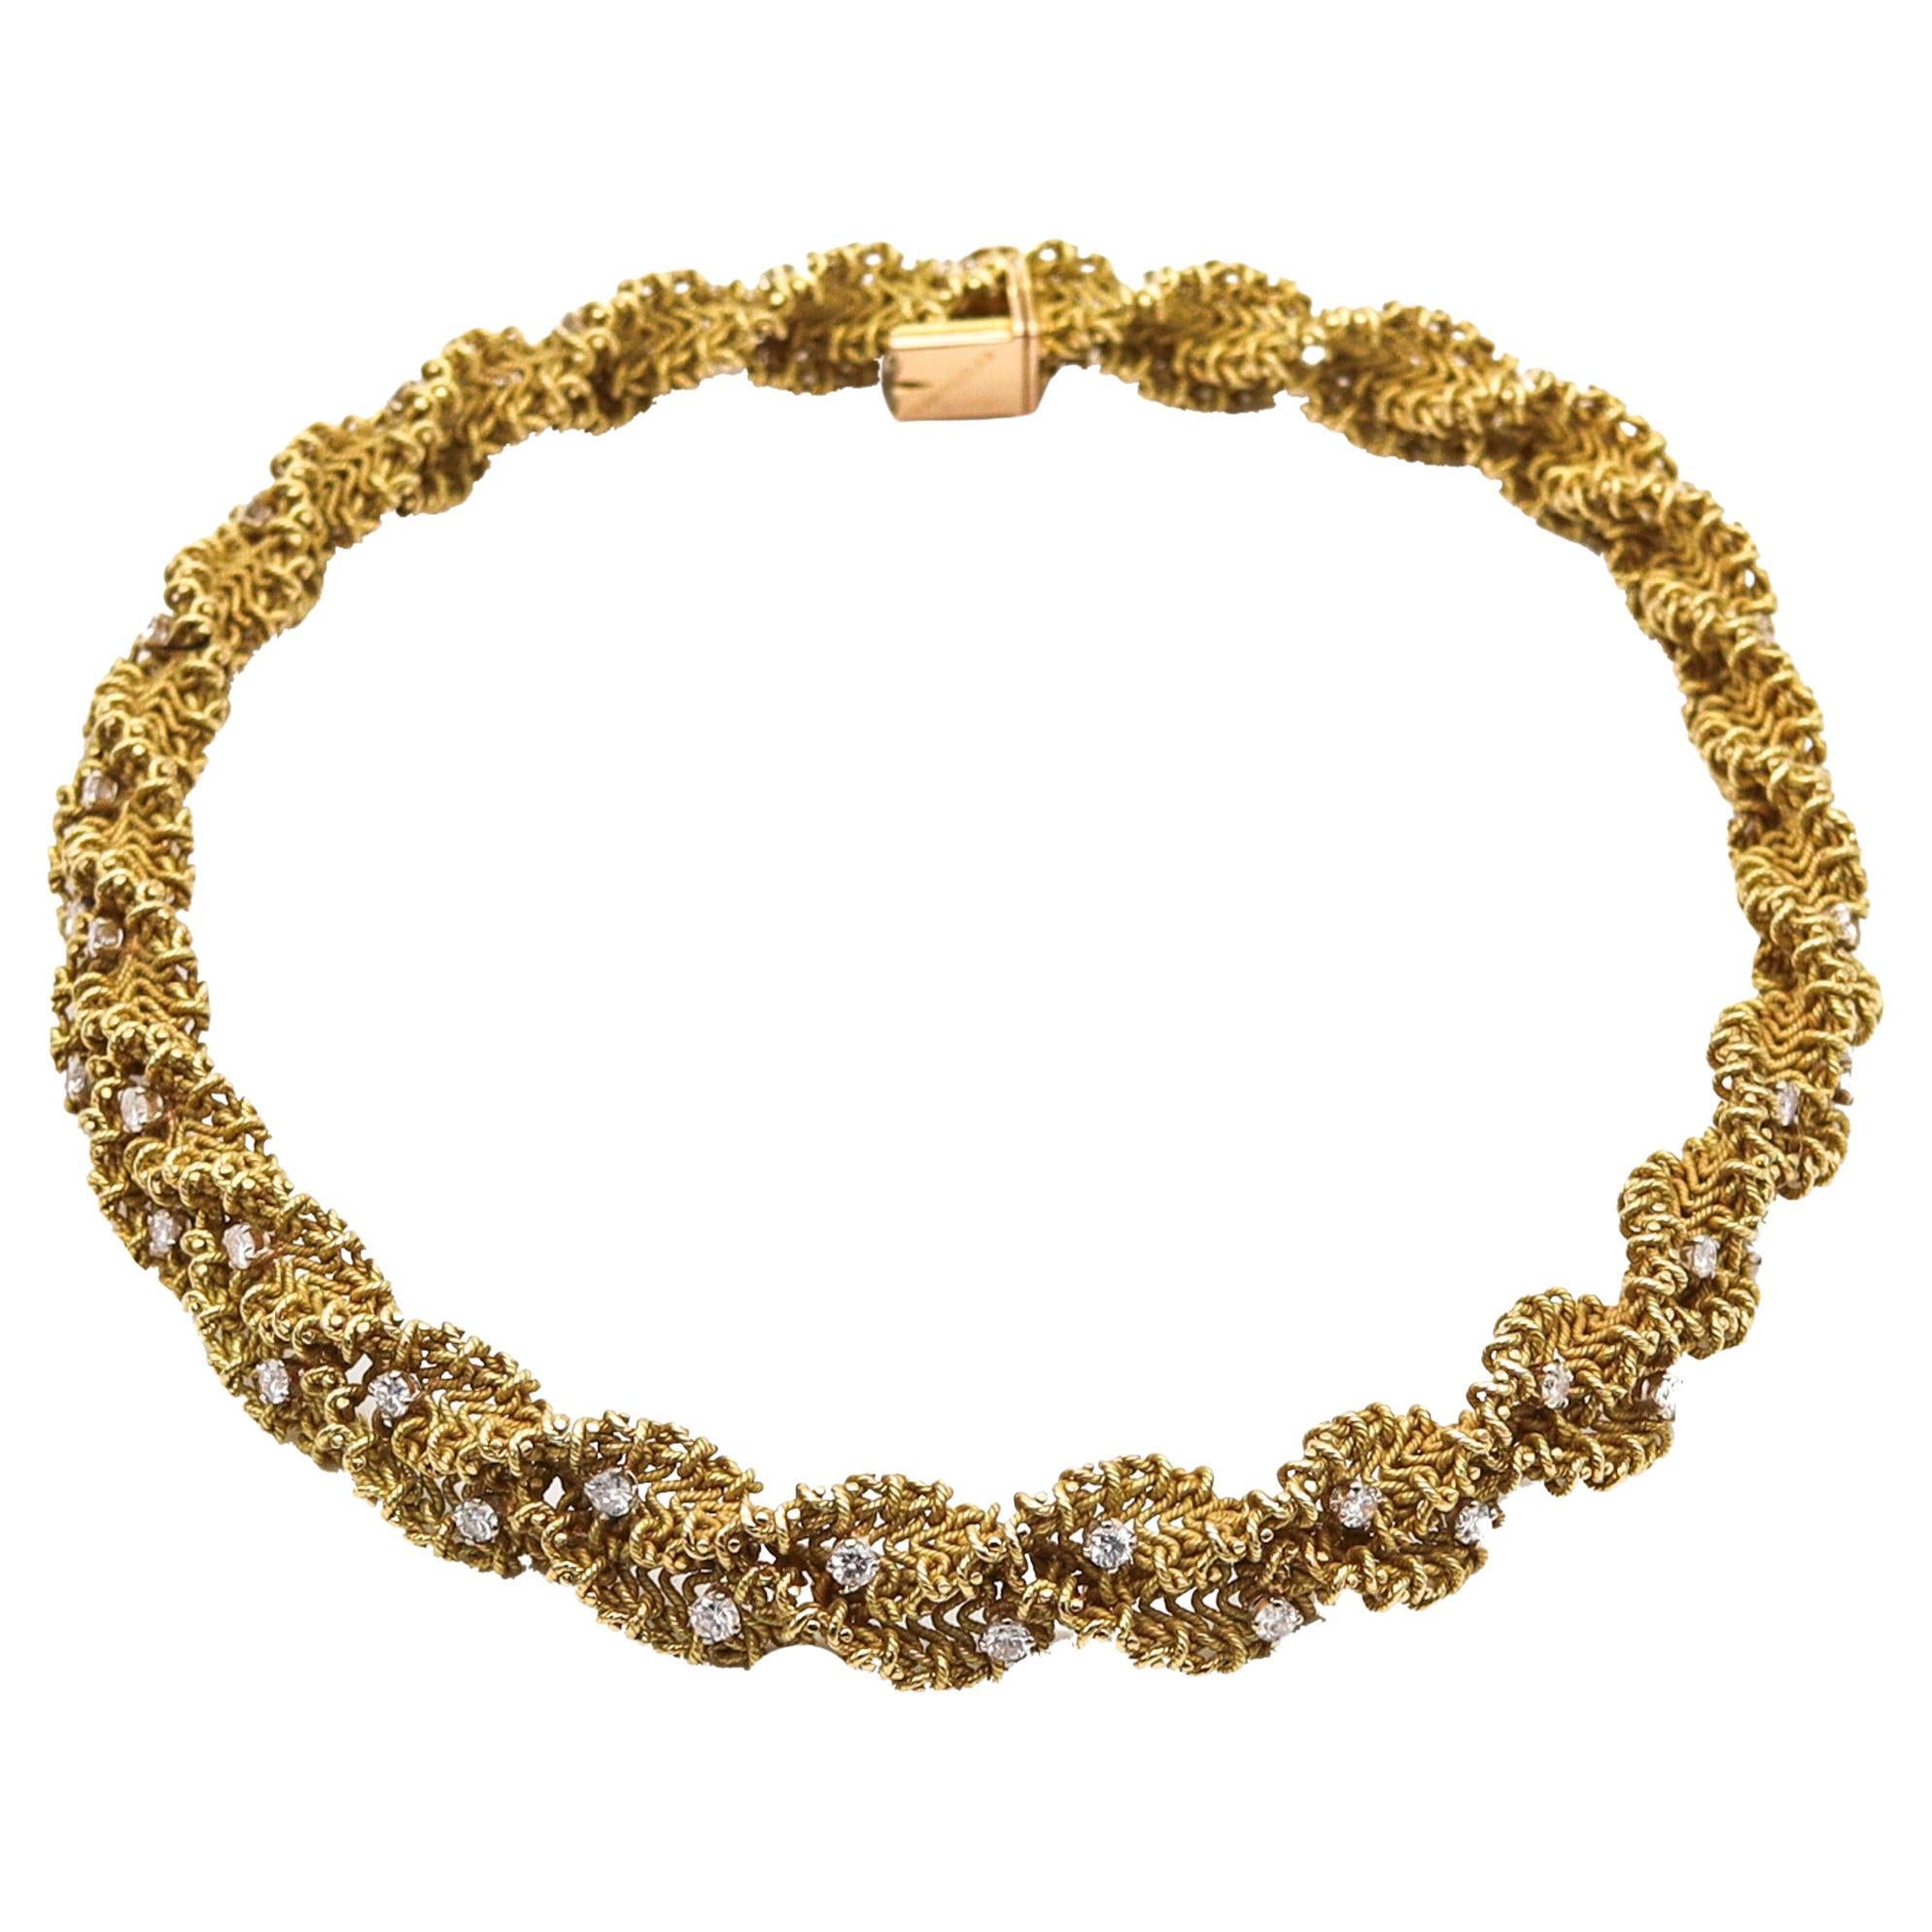 Chantecler 1960 Textured Twisted Necklace In 18Kt Gold With 5.15 Ctw In Diamonds For Sale